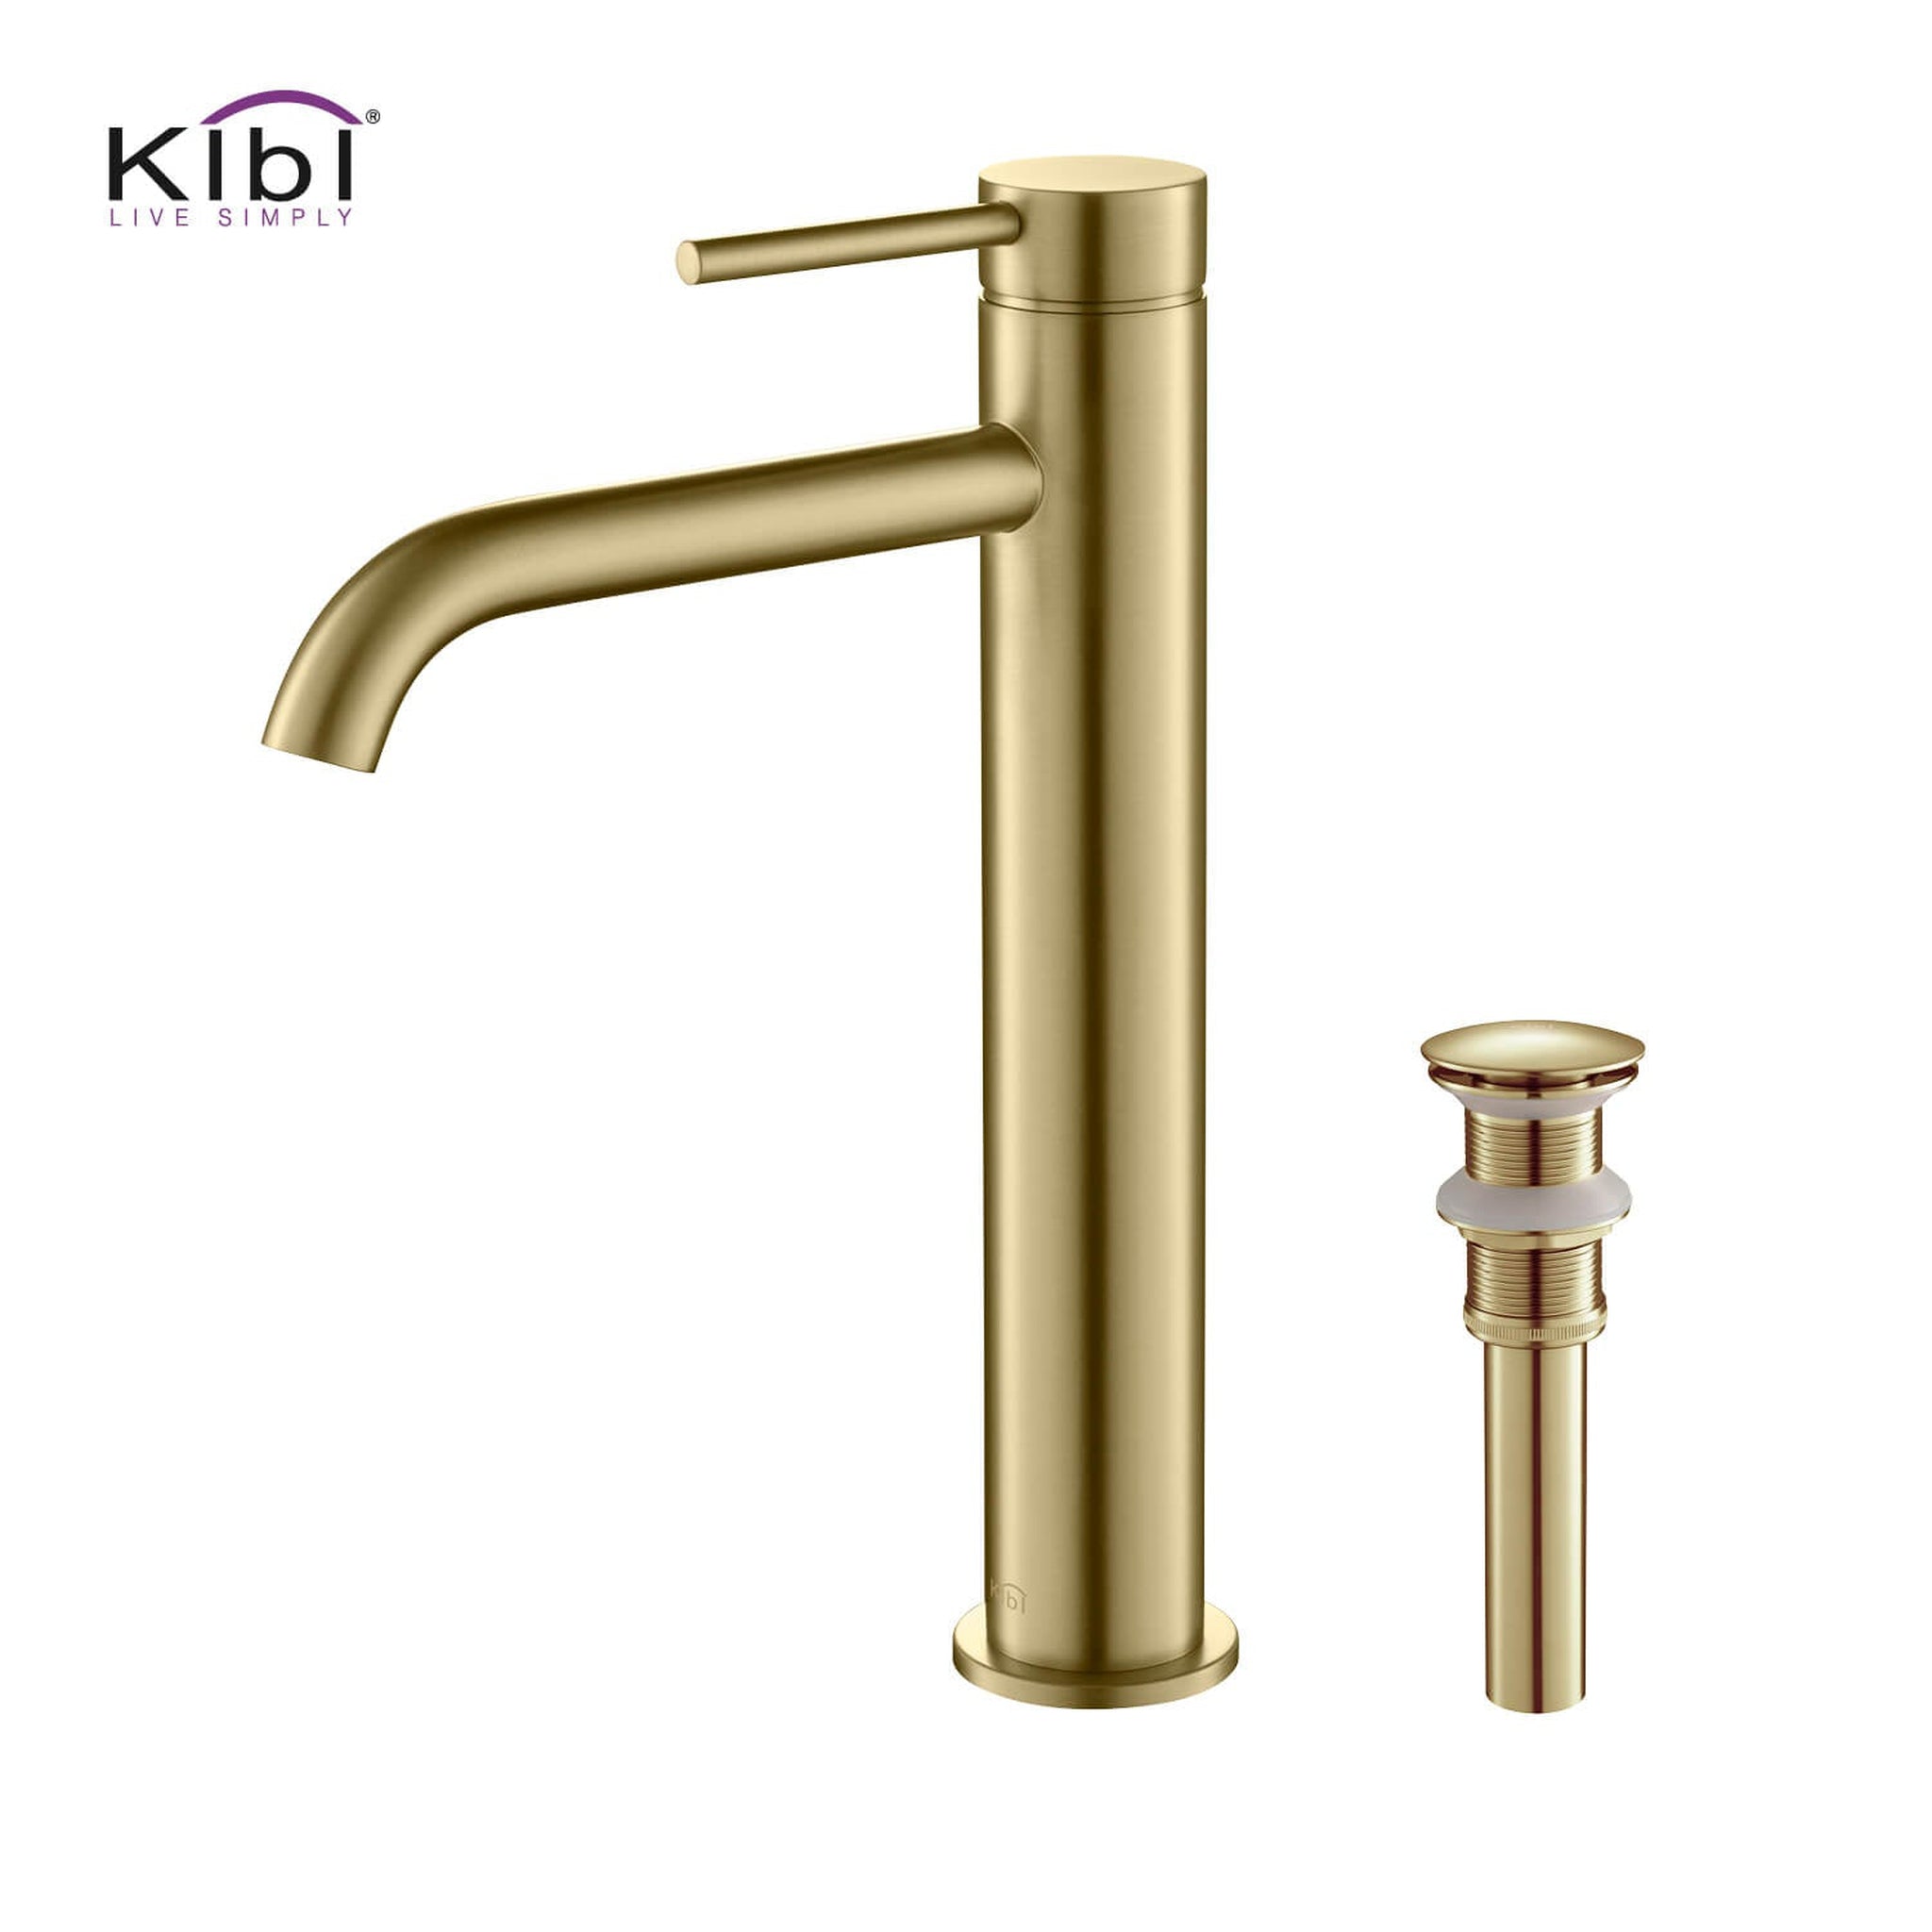 KIBI, KIBI Circular Single Handle Brushed Gold Solid Brass Bathroom Vessel Sink Faucet With Pop-Up Drain Stopper Small Cover Without Overflow